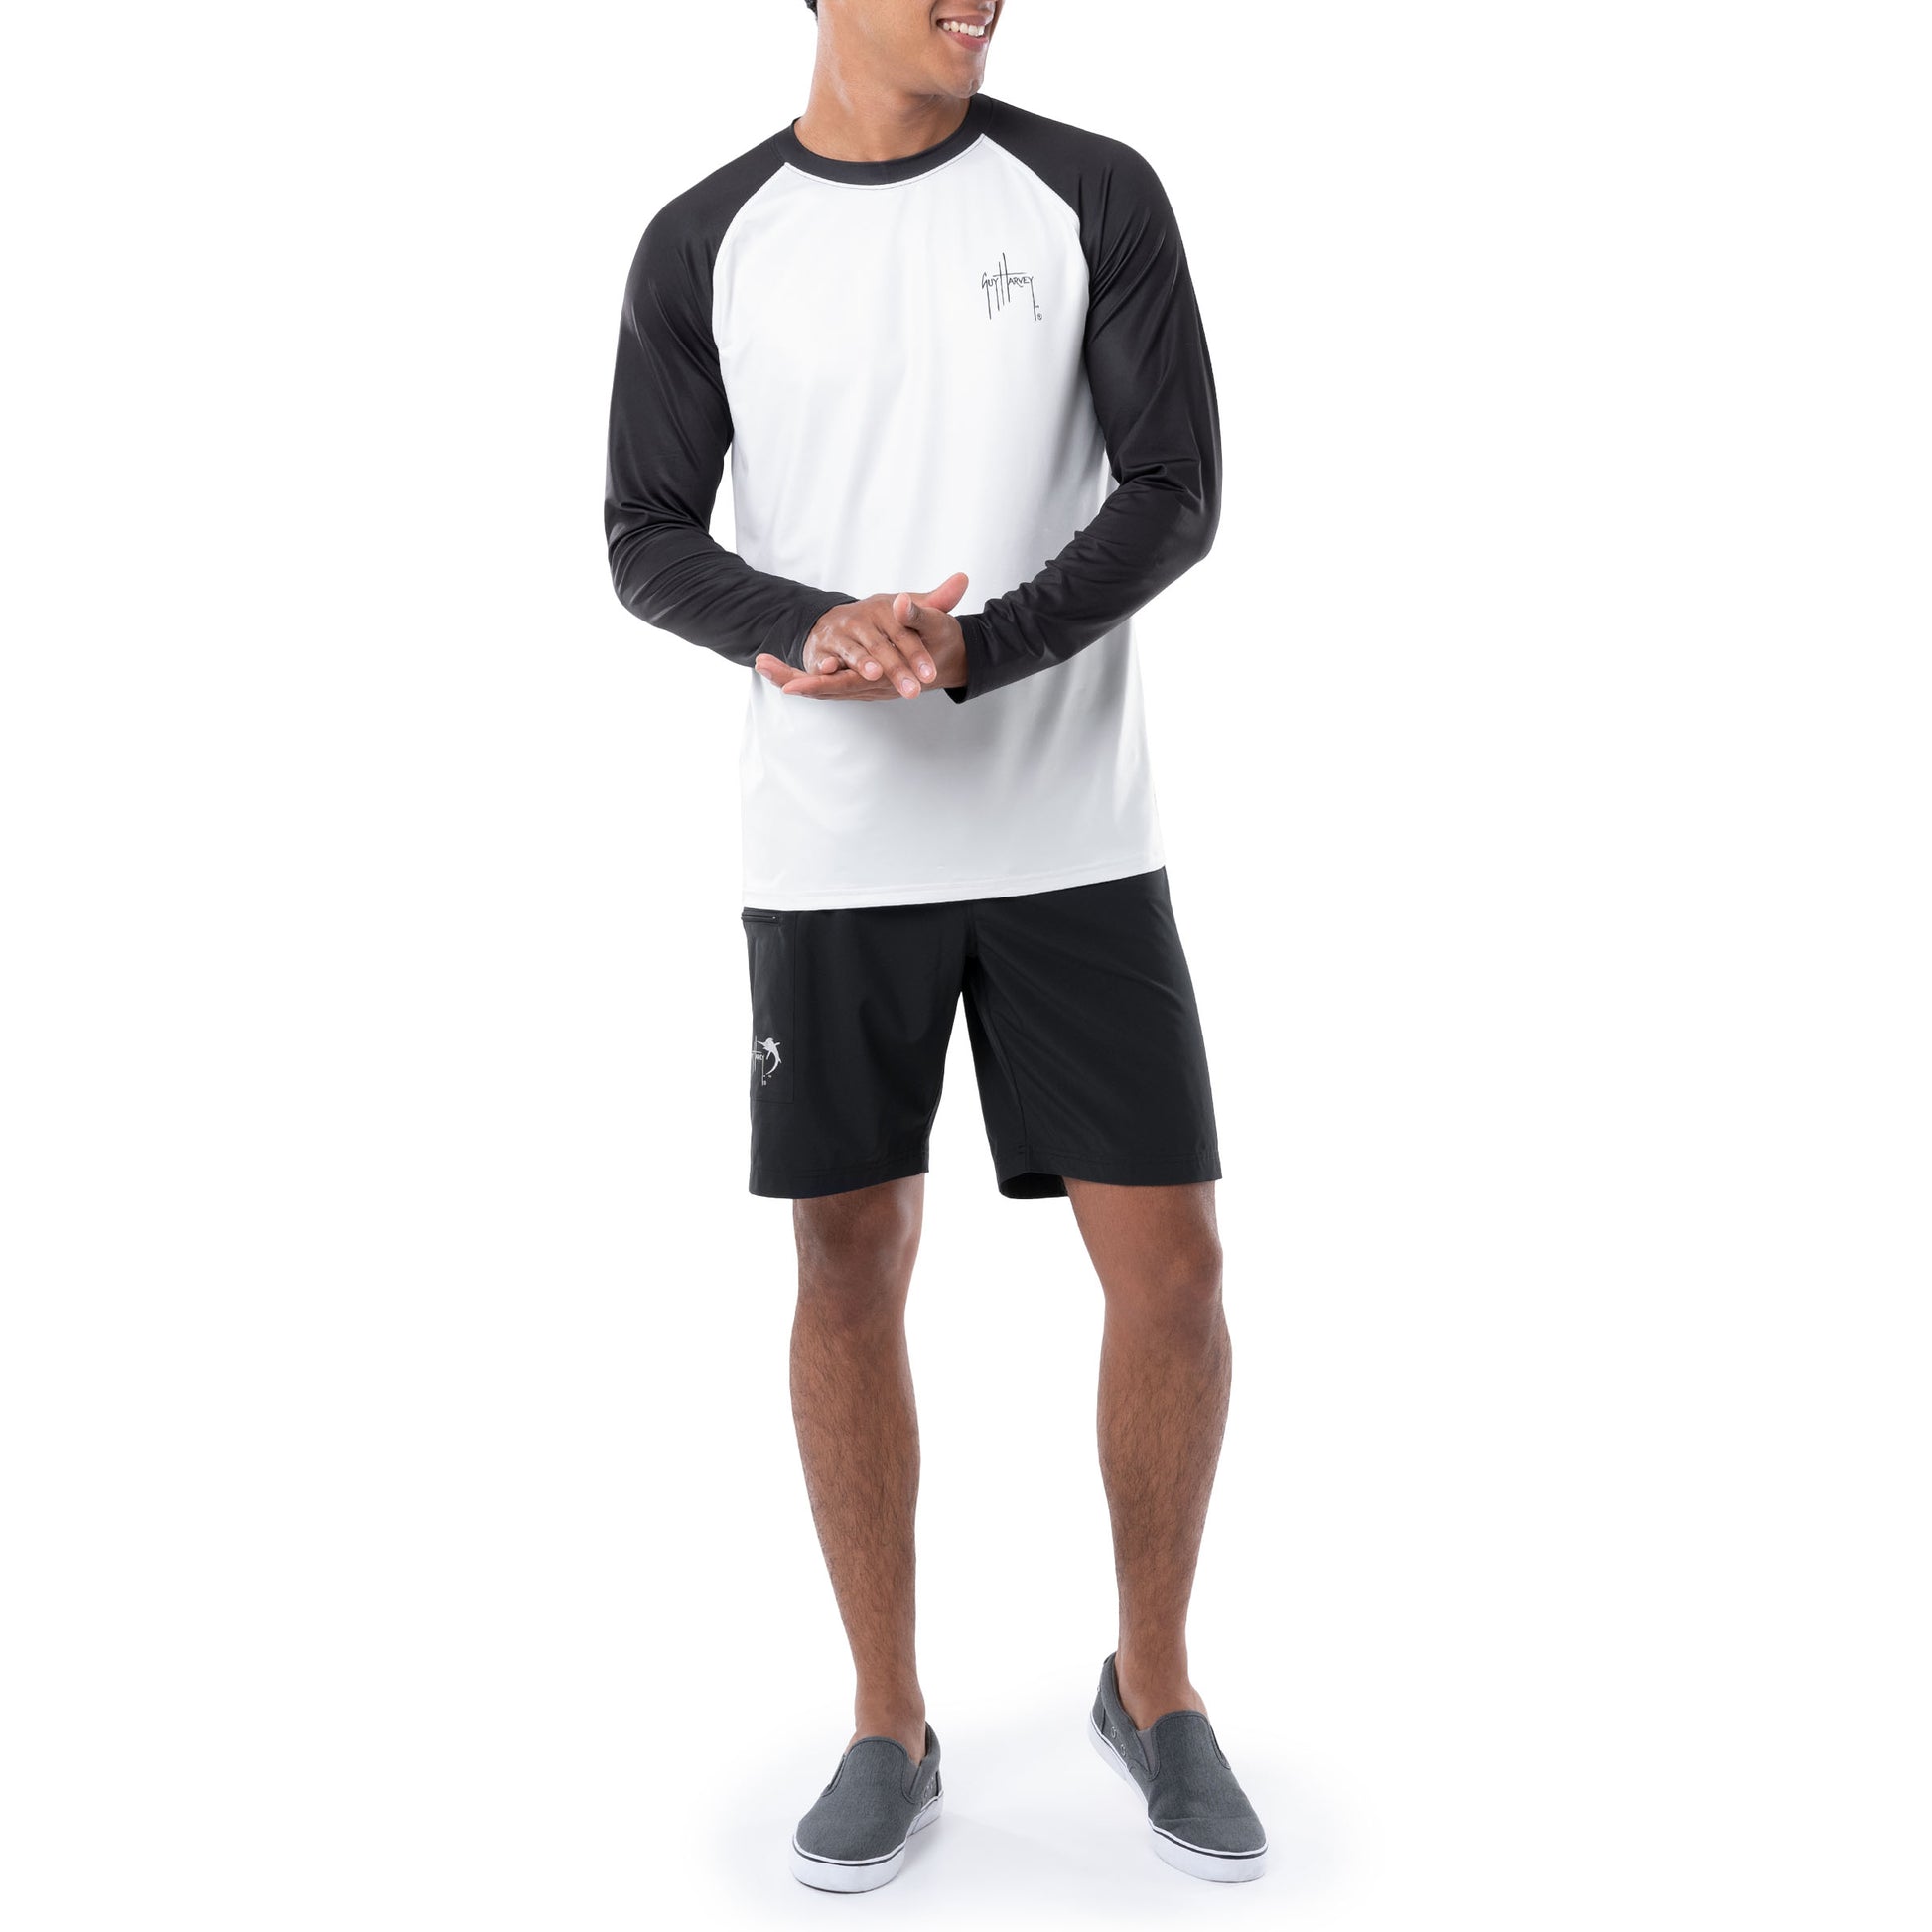 Men's On The Hunt Colorblocked Sun Protection Top View 5